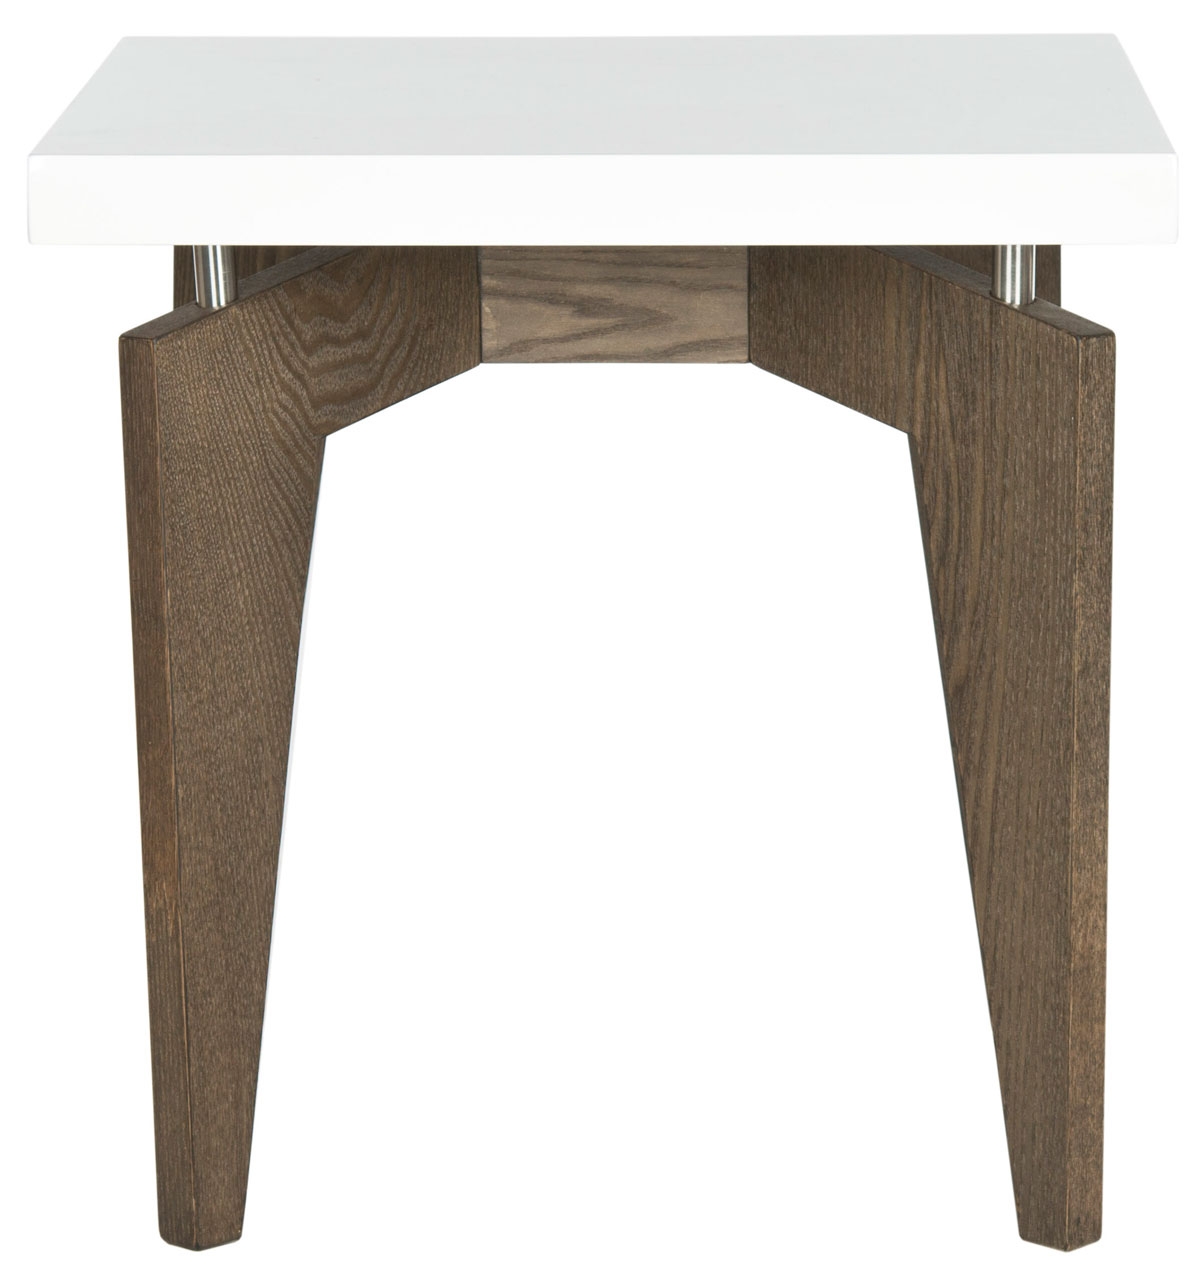 Josef Retro Lacquer Floating Top Lacquer End Table - White/Dark Brown - Arlo Home - Image 2